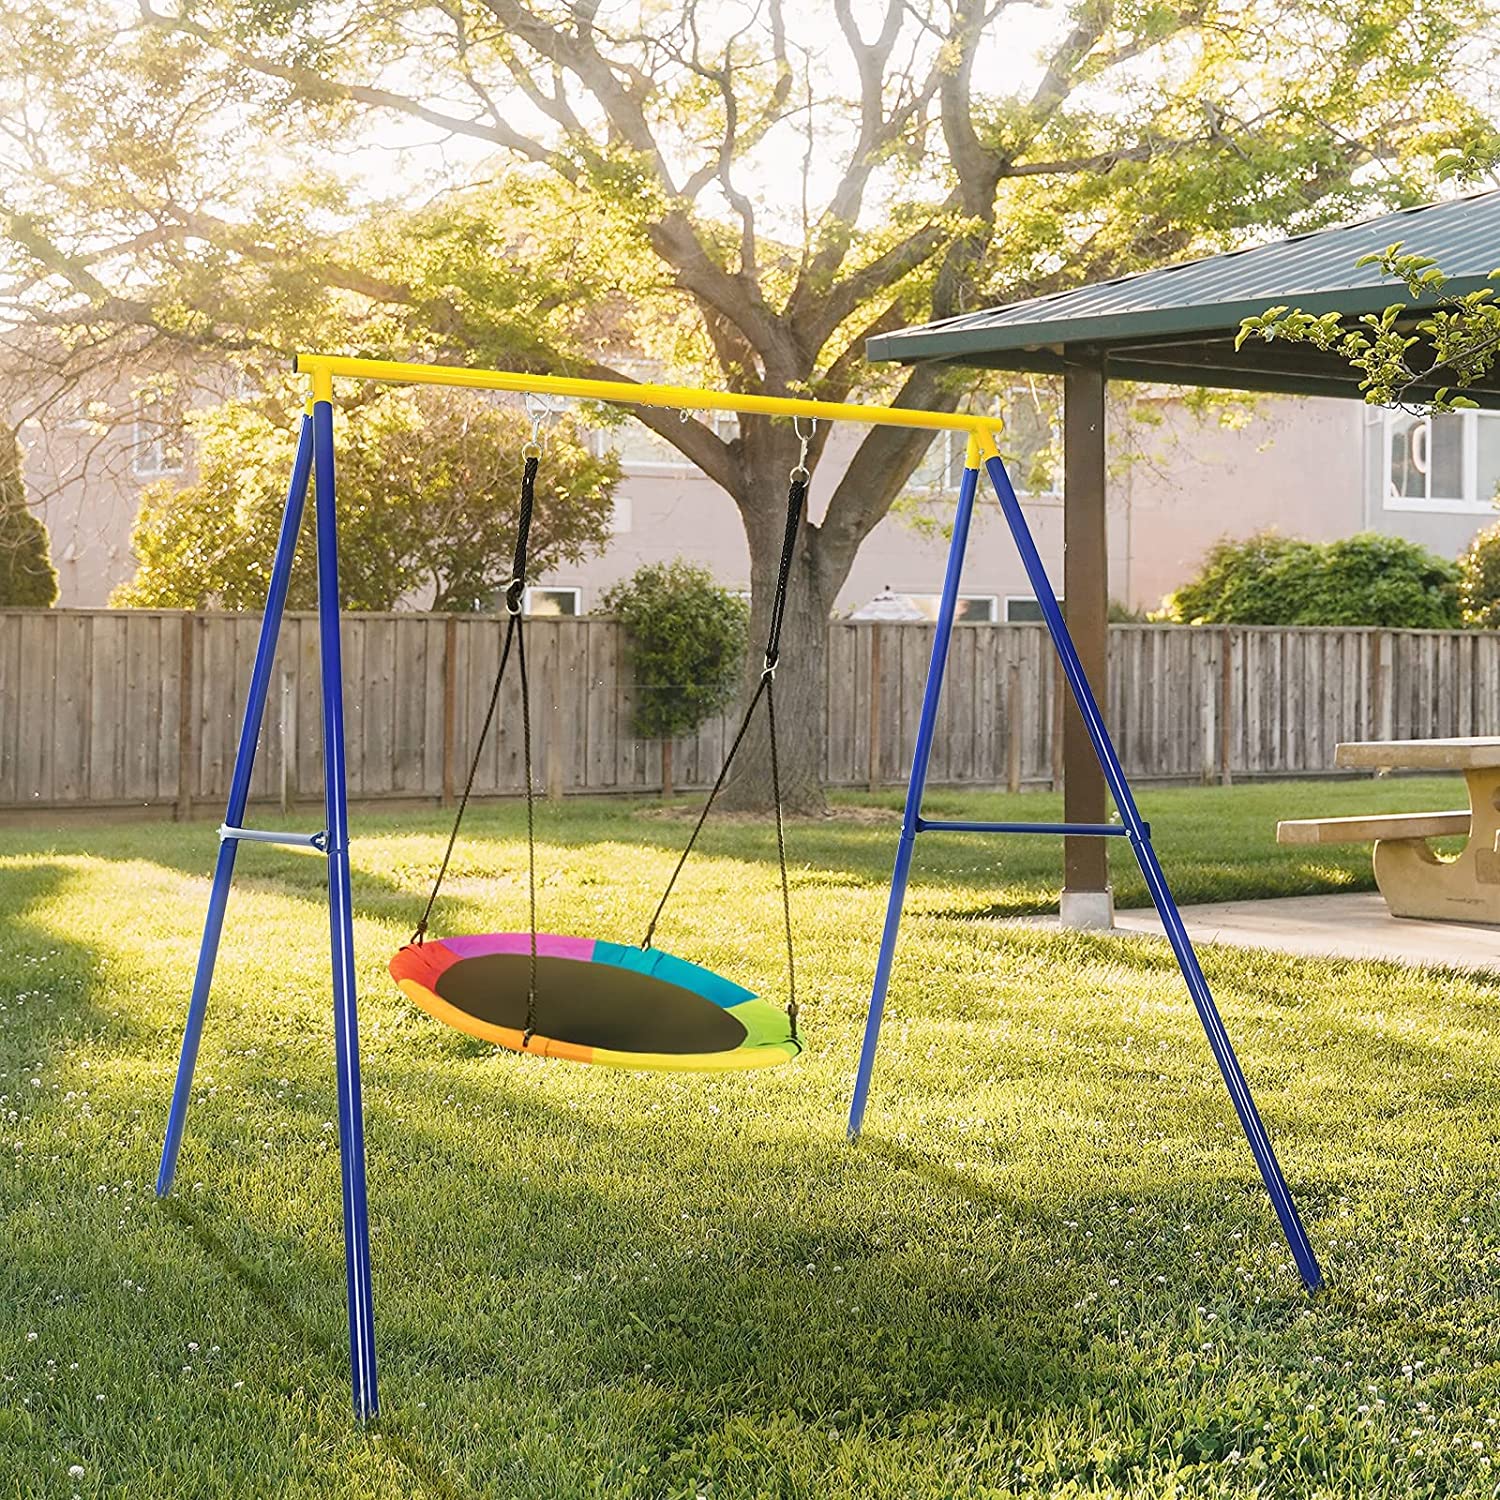 Modern and Stylish: Our Heavy Duty Swing Stand is surely perfect backyard playsets for kids to burn energy in the great outdoors. Add More fun to Your Home!